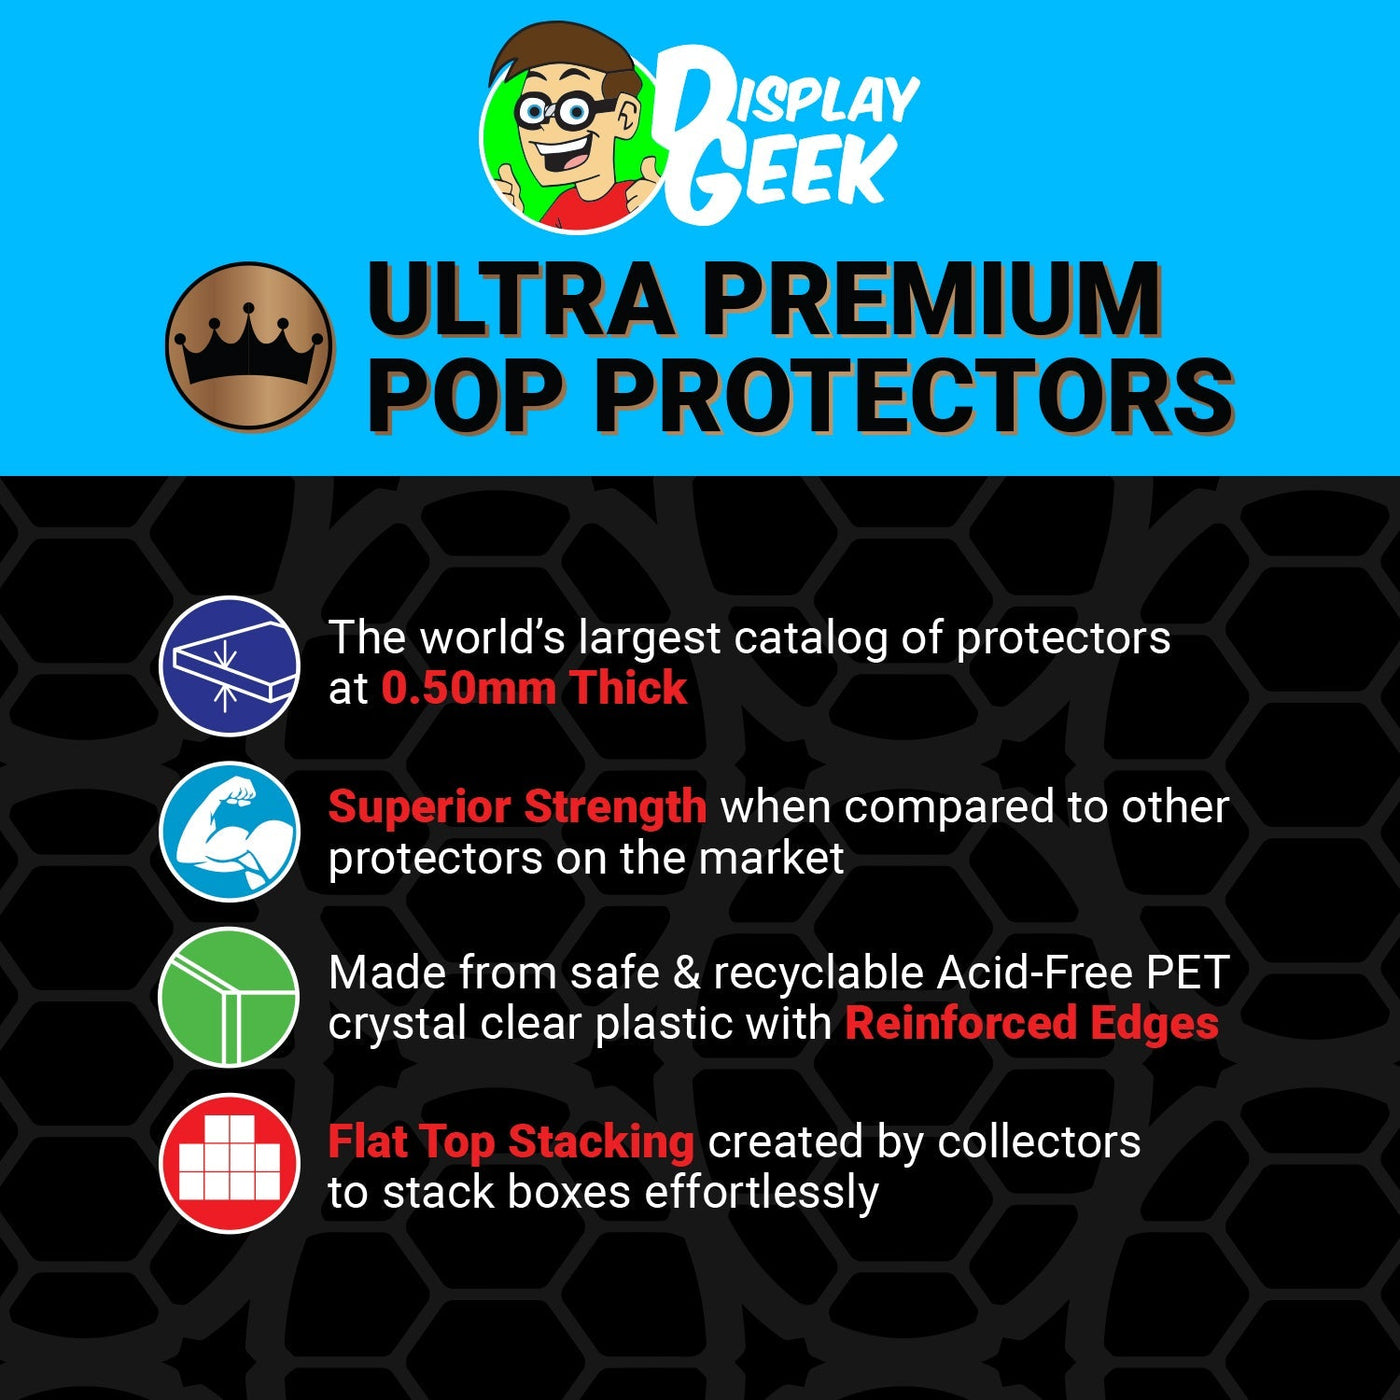 Pop Protector for 9 inch Giant Freddy Funko Orange Hair SDCC Funko Pop on The Protector Guide App by Display Geek